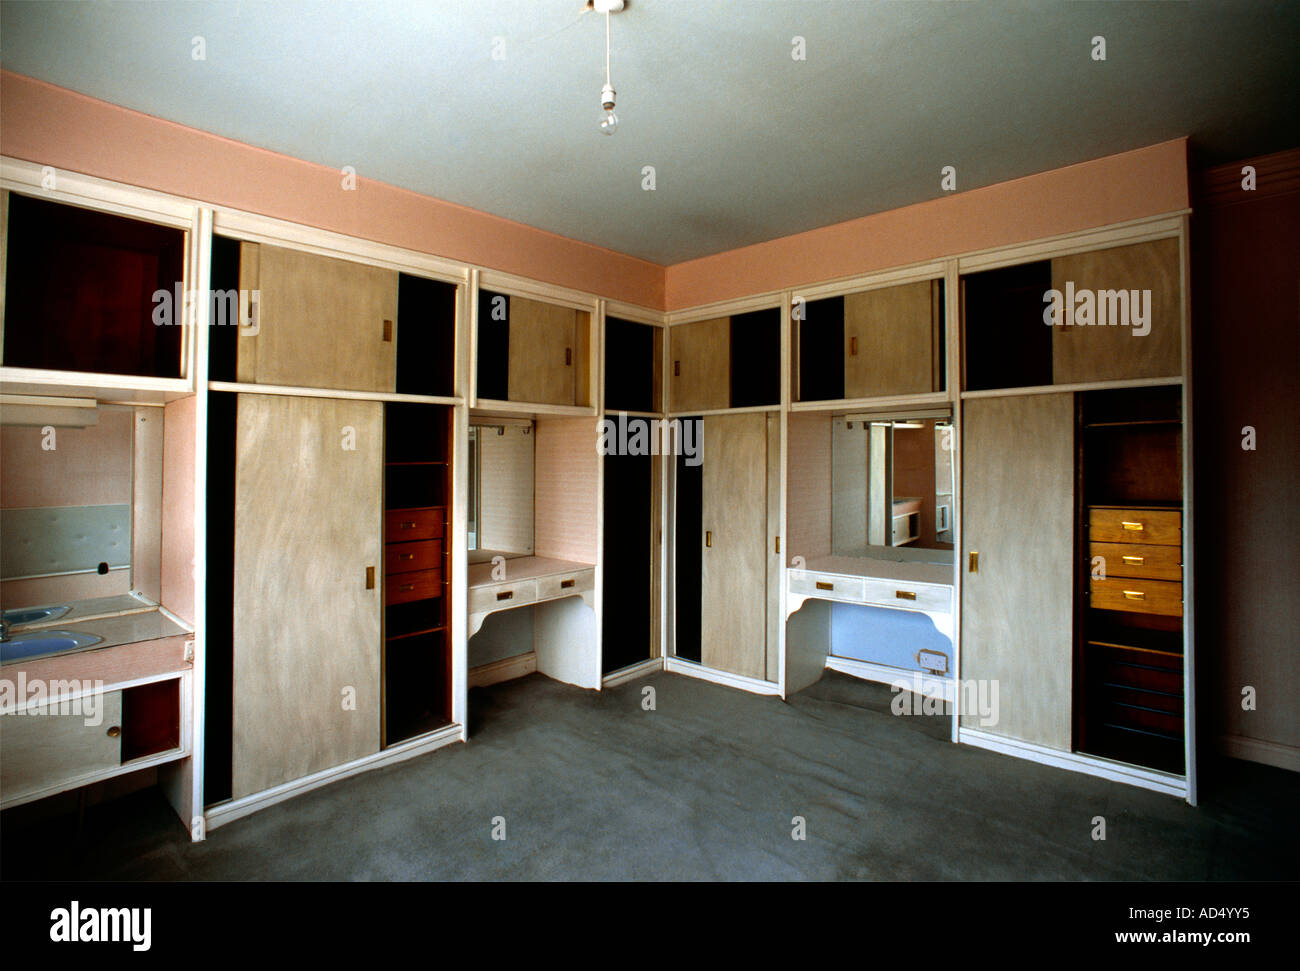 Empty Bedroom With Cupboards And Wardrobes Stock Photo